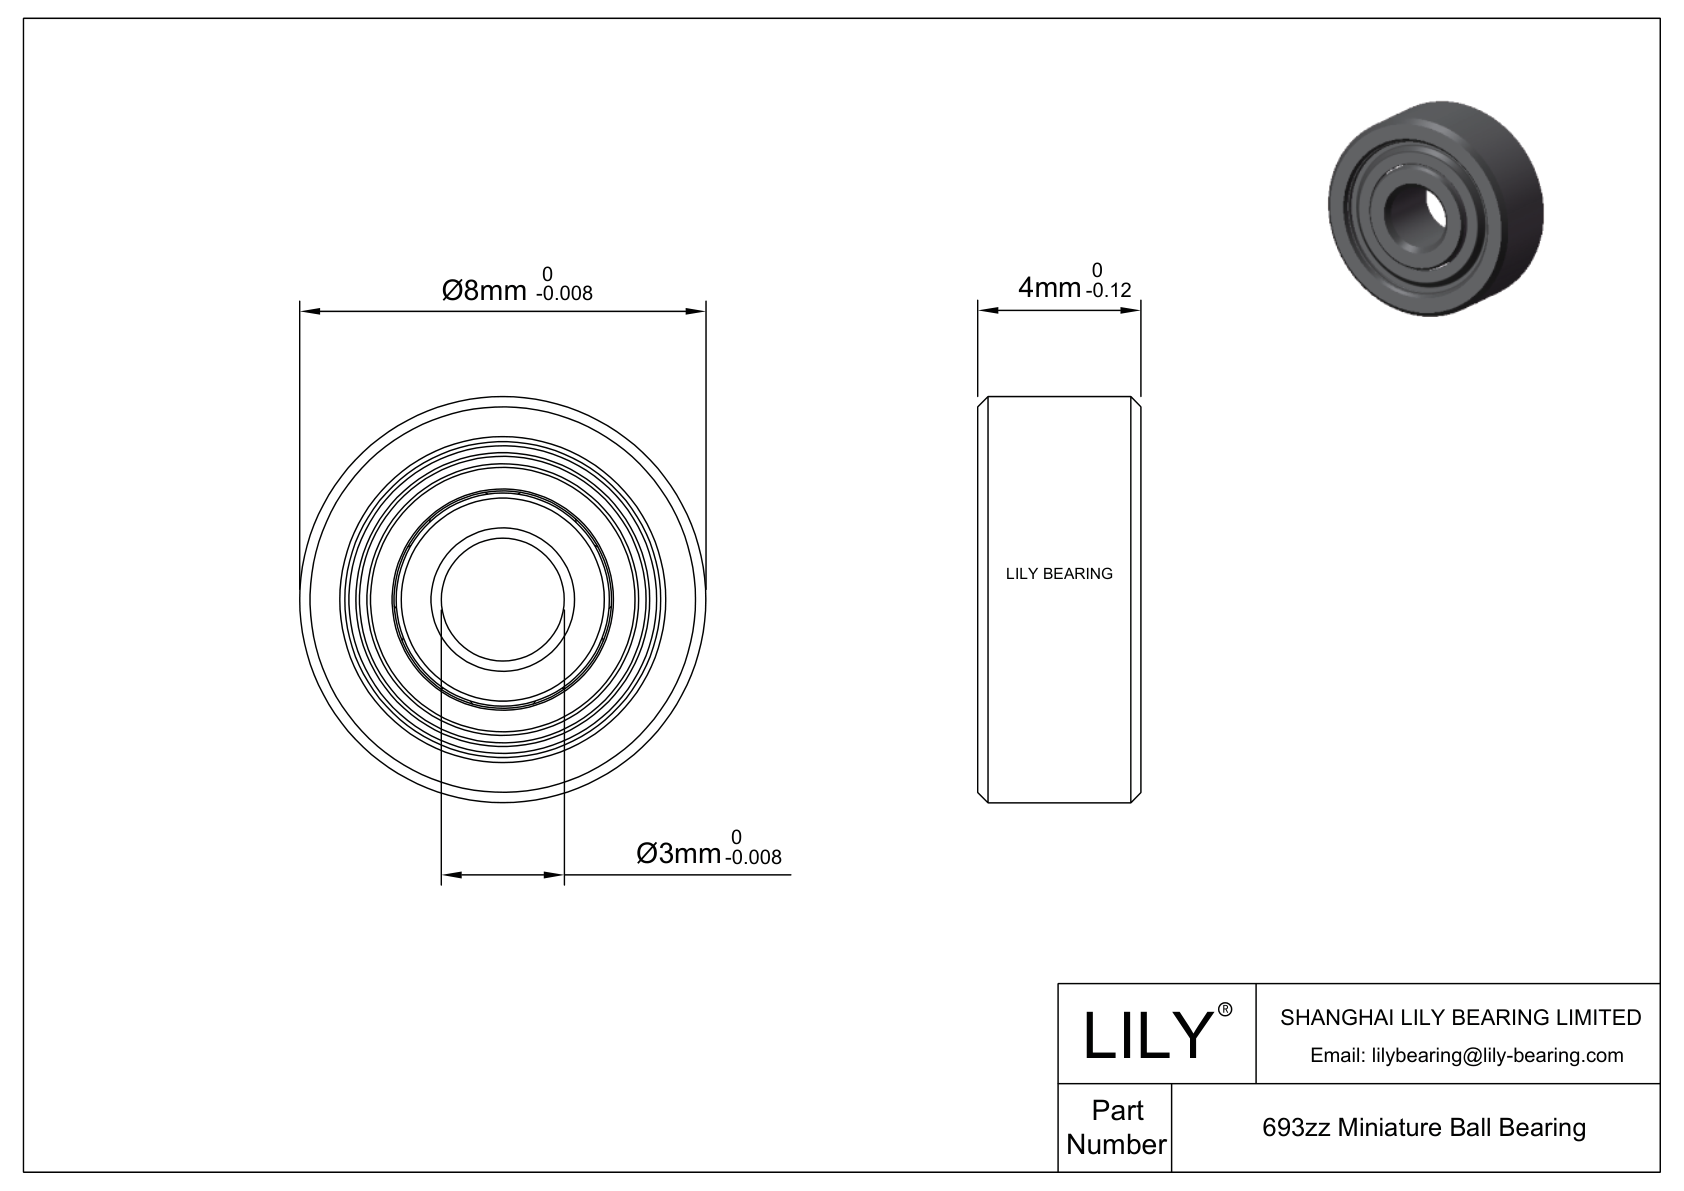 LILY-BS69310-5 POM Coated Bearing cad drawing